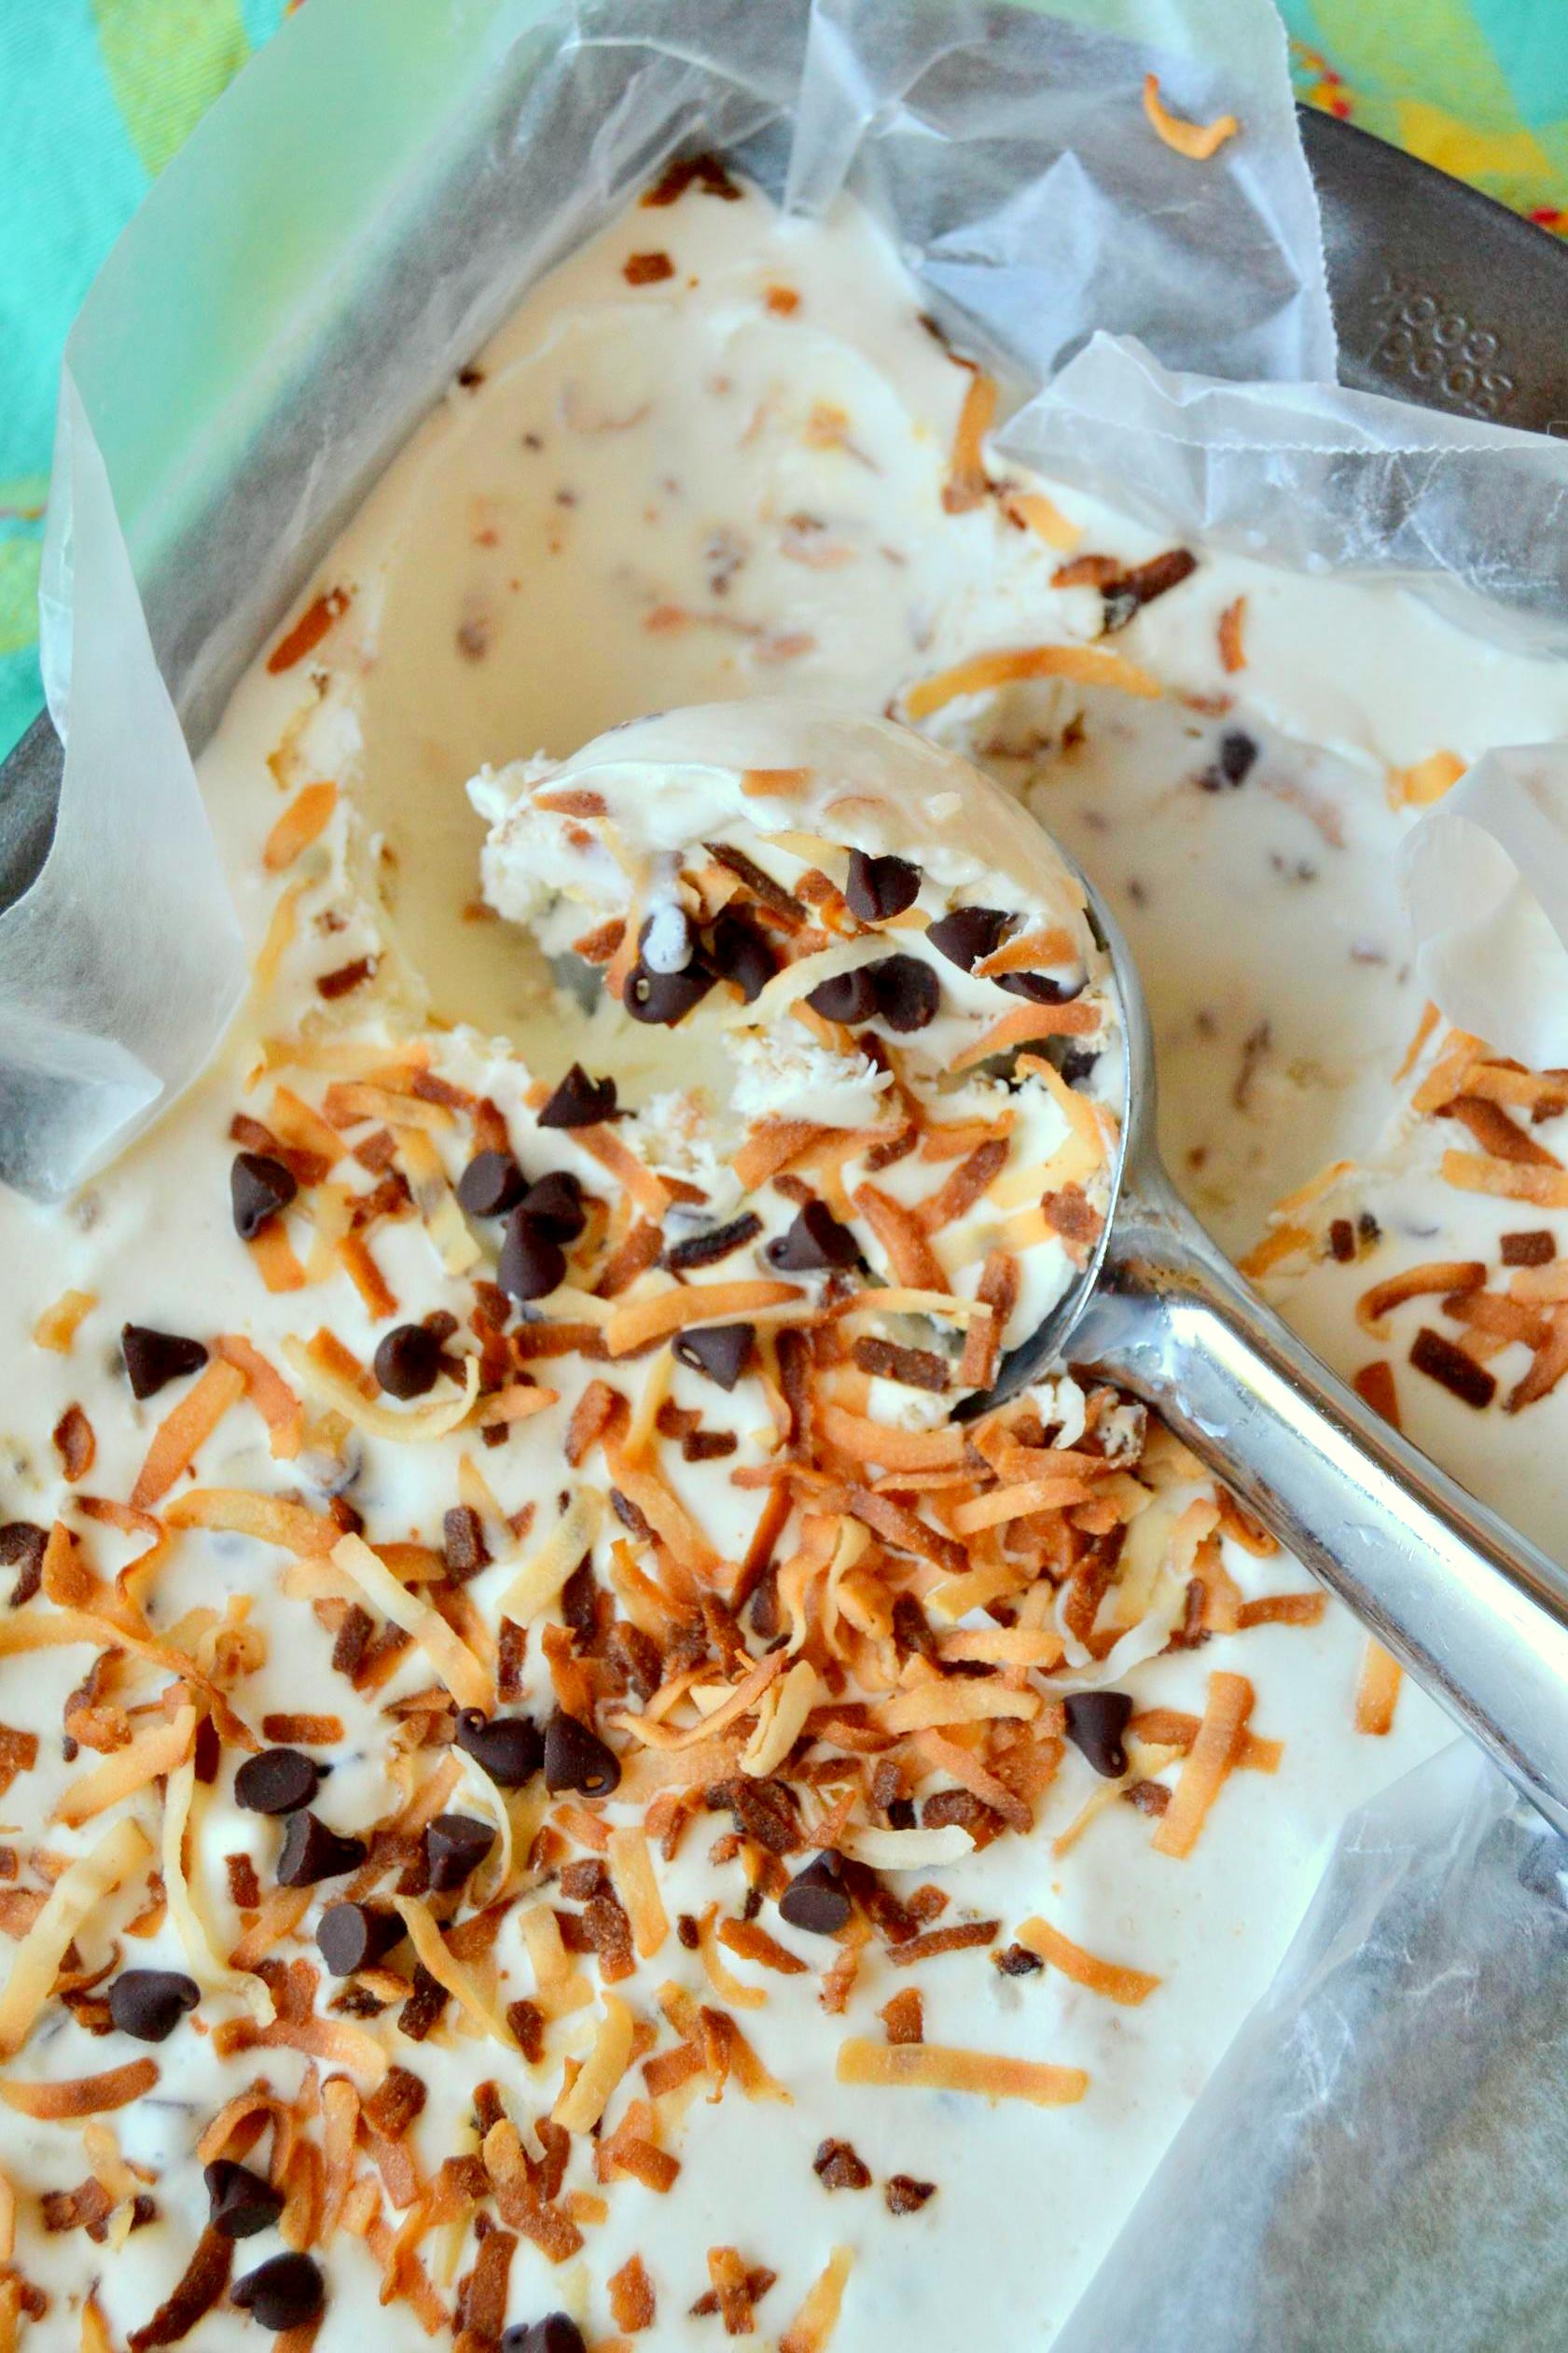 Toasted Coconut and Chocolate Chip Ice Cream